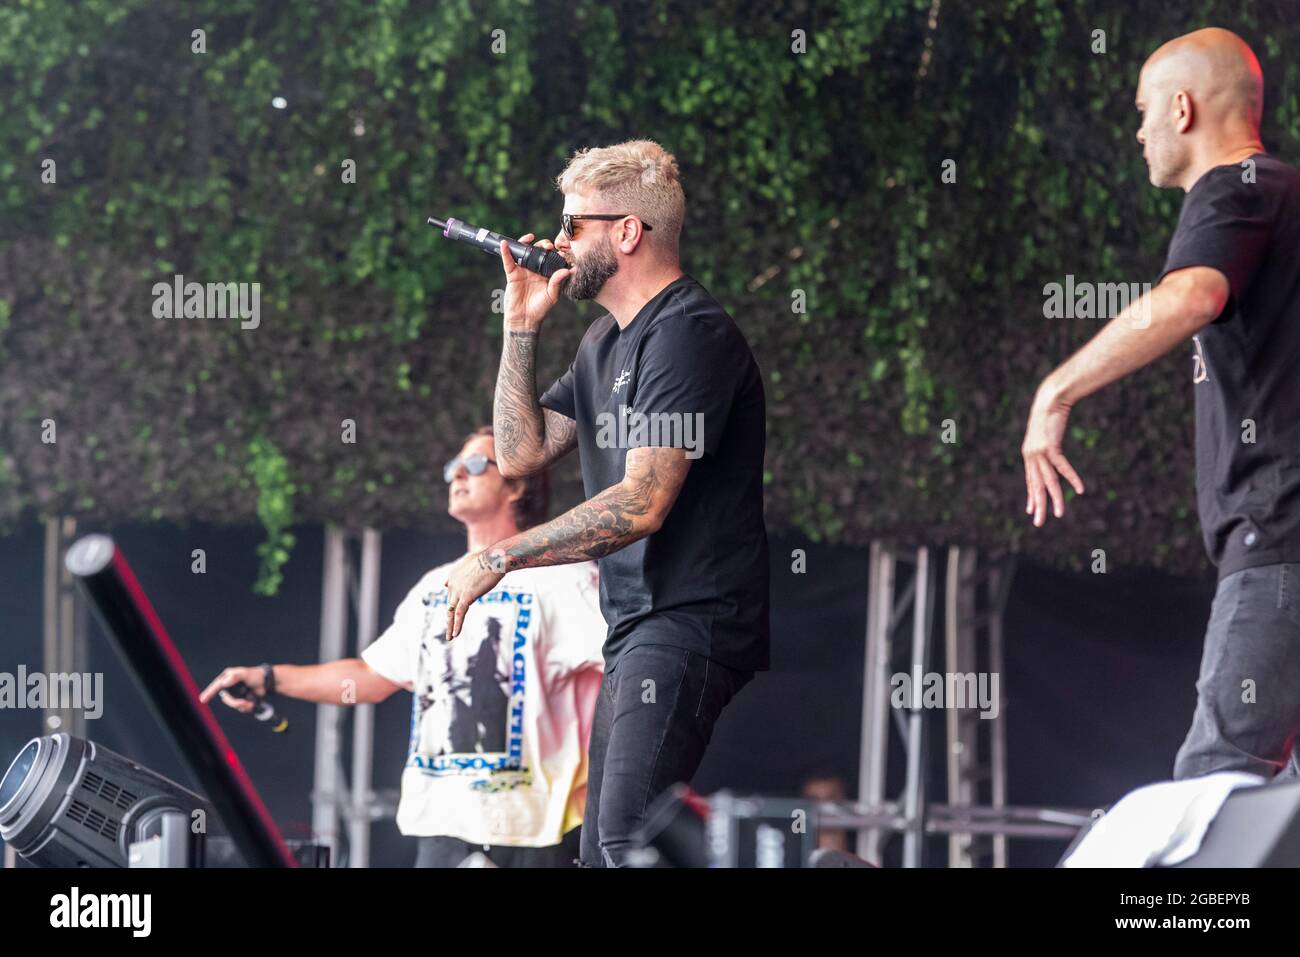 Sean Conlon, Ritchie Neville and Scott Robinson of the band Five, stylised as 5ive, performing at Fantasia music festival in Maldon, Essex, UK Stock Photo